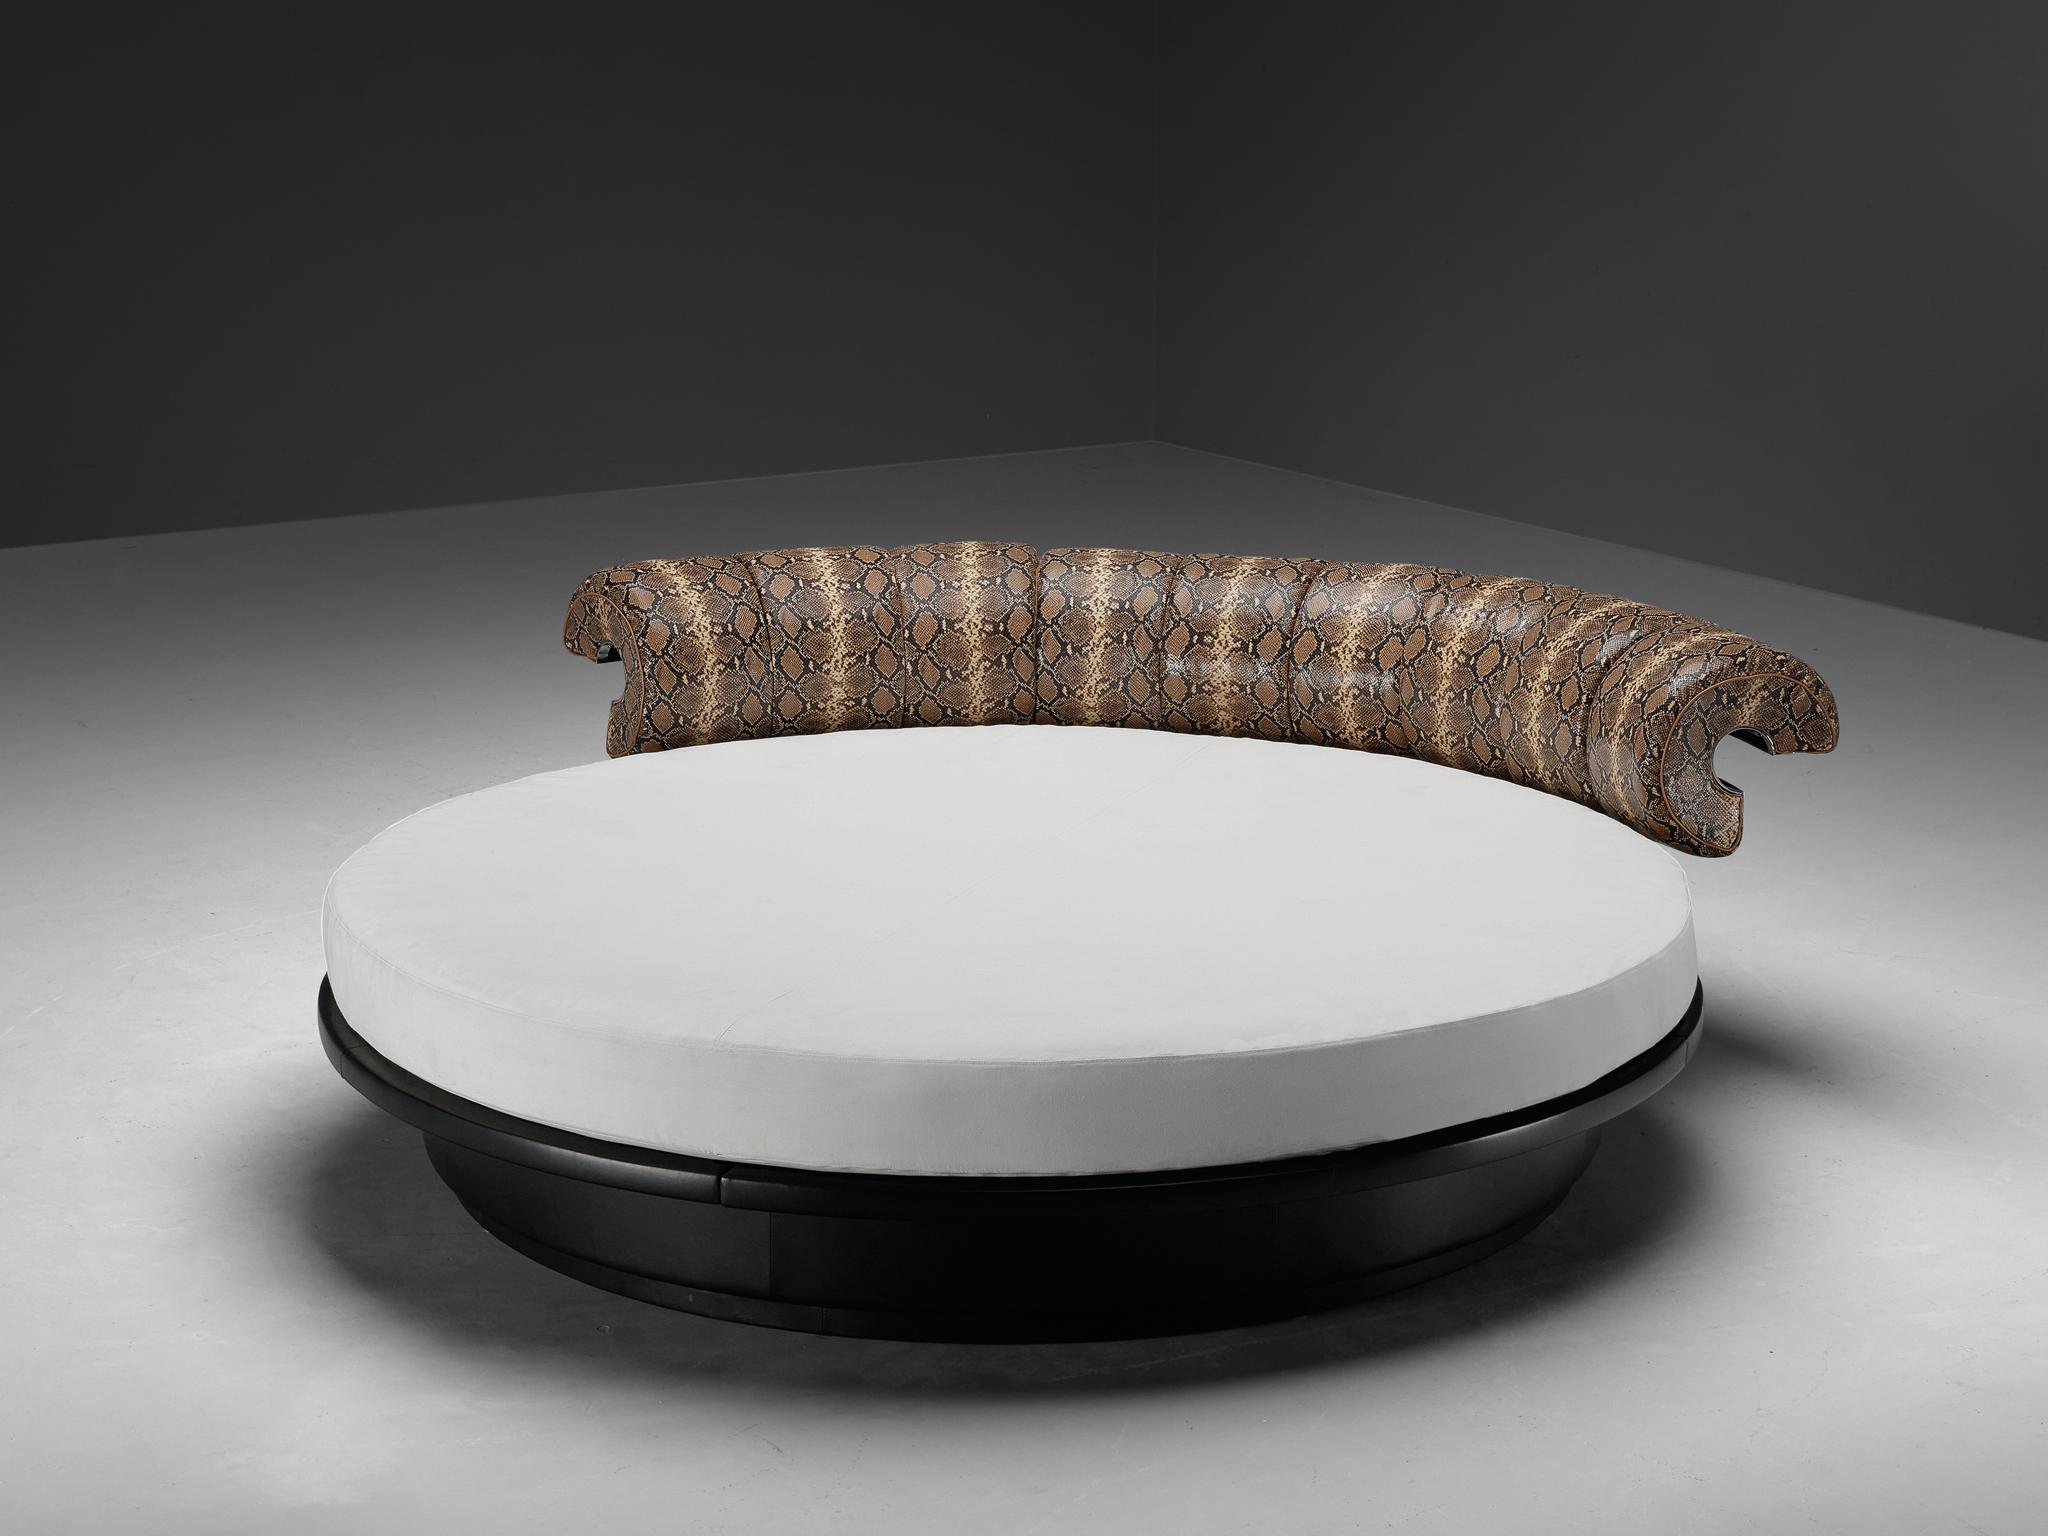 Luigi Massoni for Poltrona Frau, 'Lullaby Due' bed, leather, wood, chromed steel, faux-snake leather, faux leather, Italy, designed in 1968

Stunning 'Lullaby Due' bed by Luigi Massoni for Poltrona Frau in an eye-catching faux snake leather